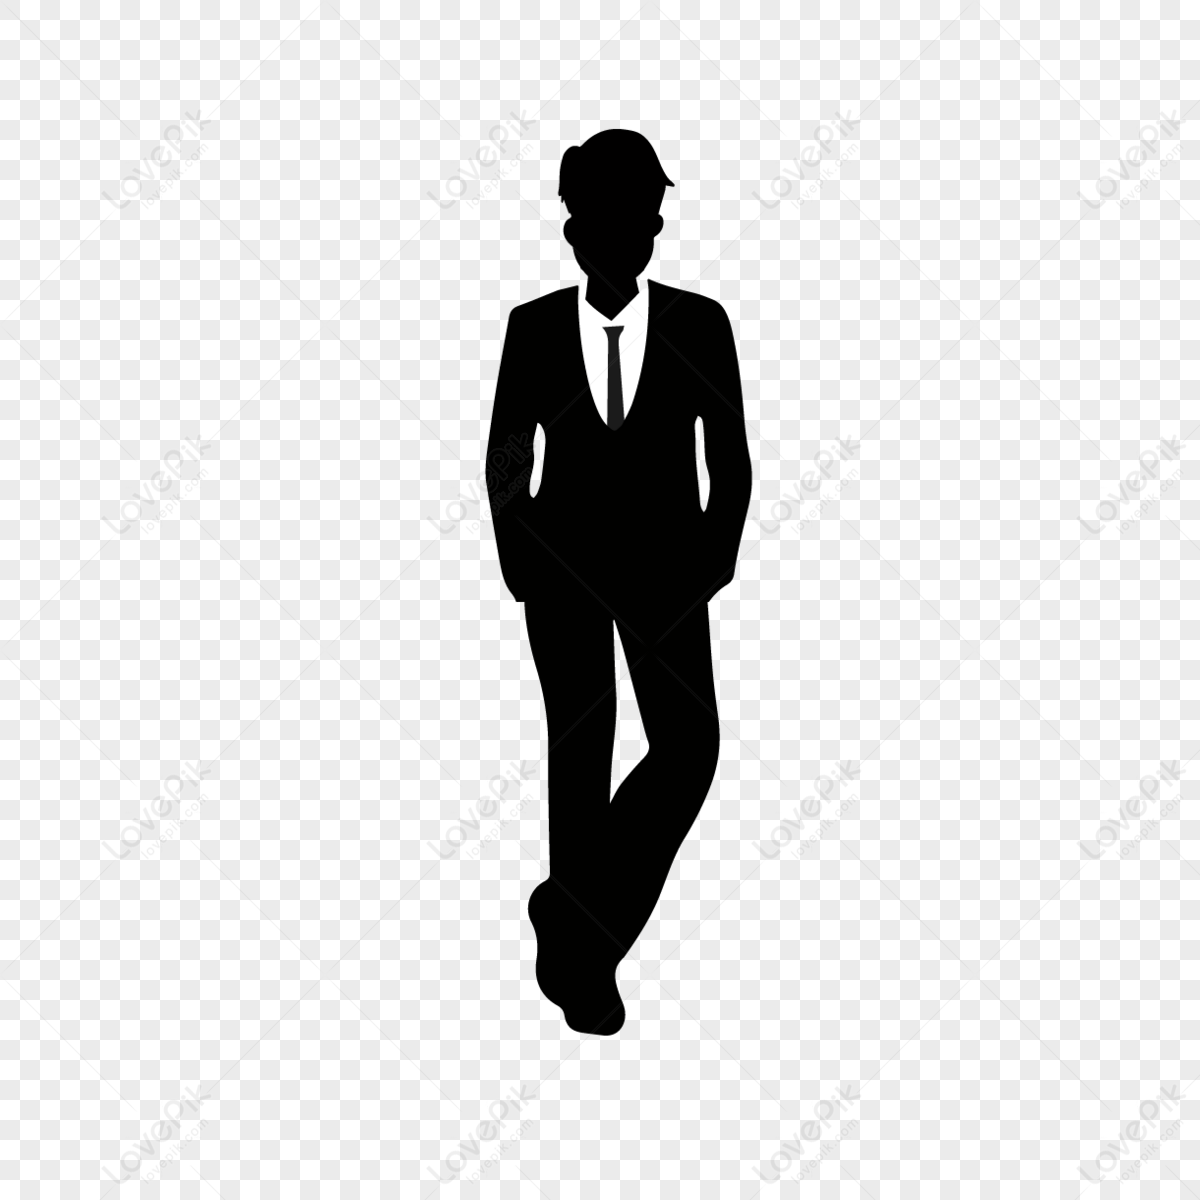 People Posing Silhouette PNG Free, People Walking Pose Silhouette Vector  Material 2, Business, Character, Ms PNG Image For Free Download